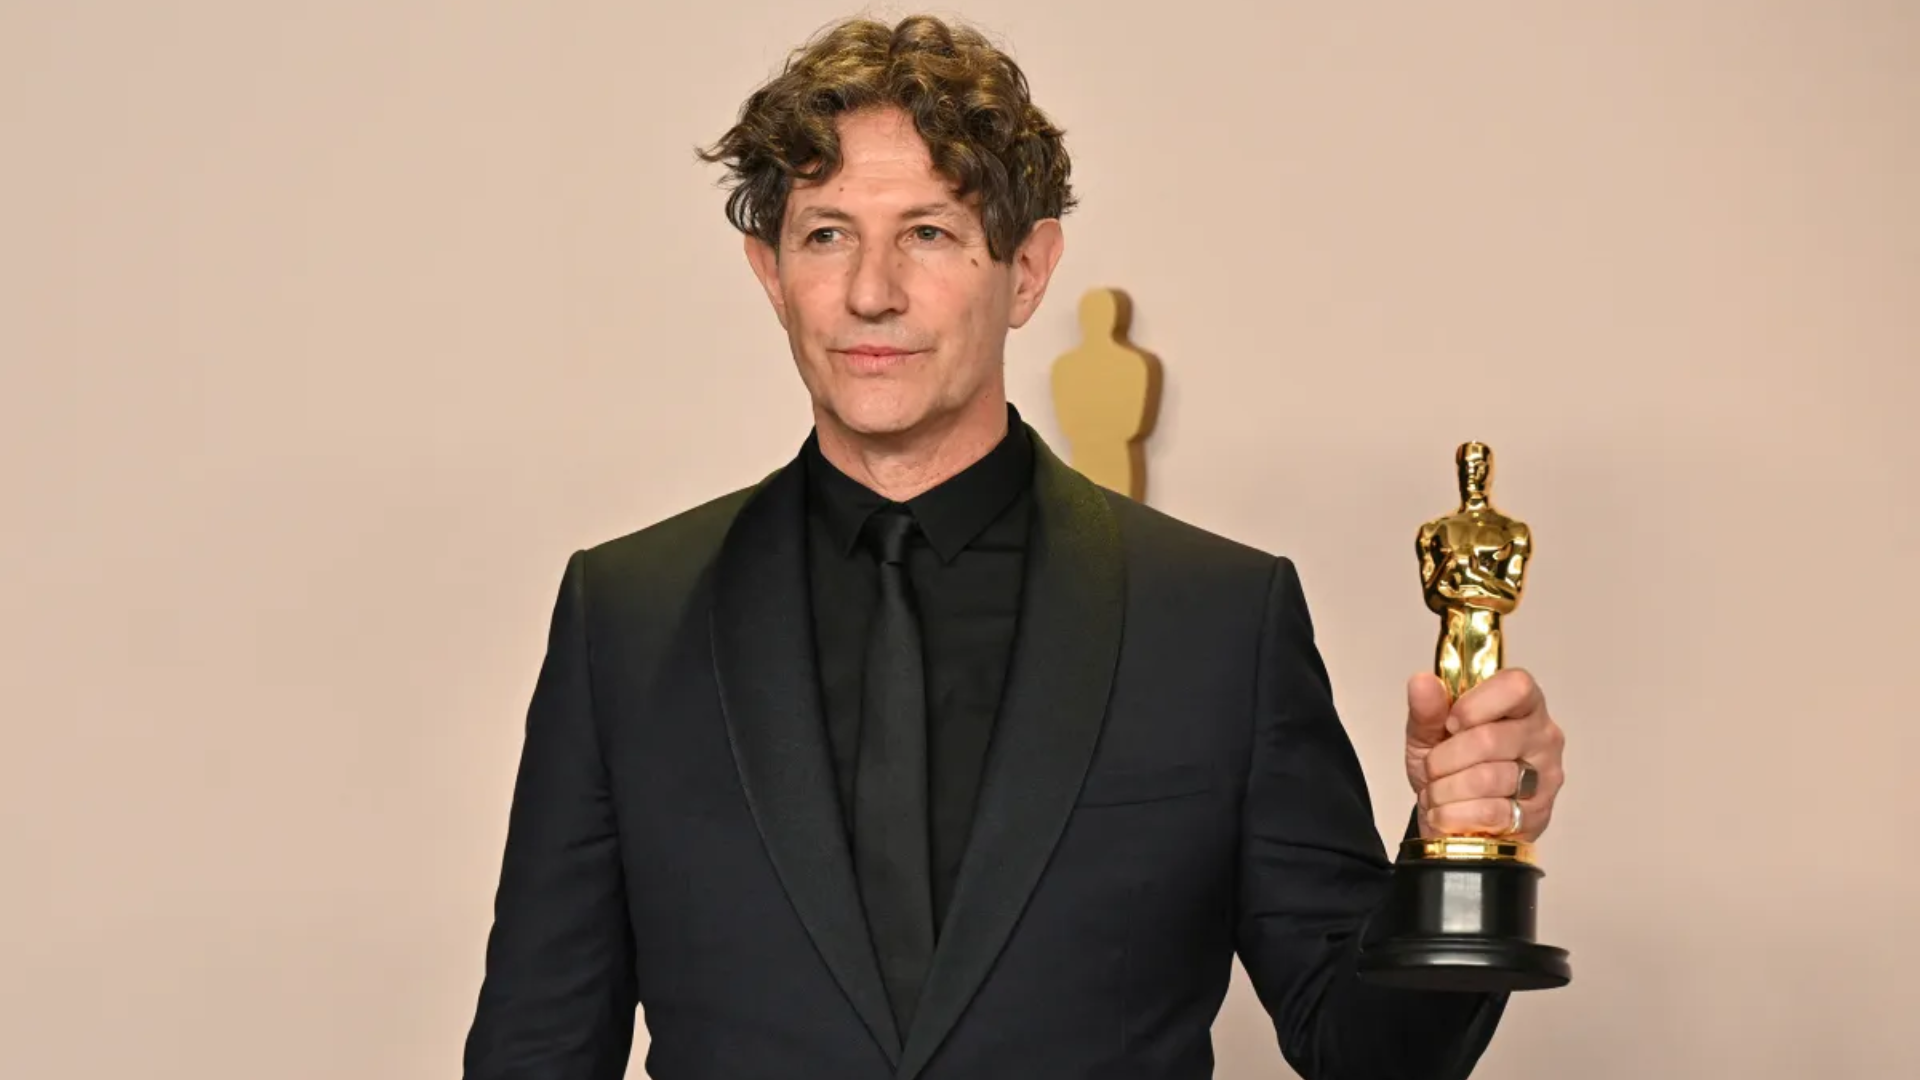 Jonathan Glazer’s Oscar Speech For ‘The Zone of Interest’ Denounced By More Than 1000 Jews In An Open Letter